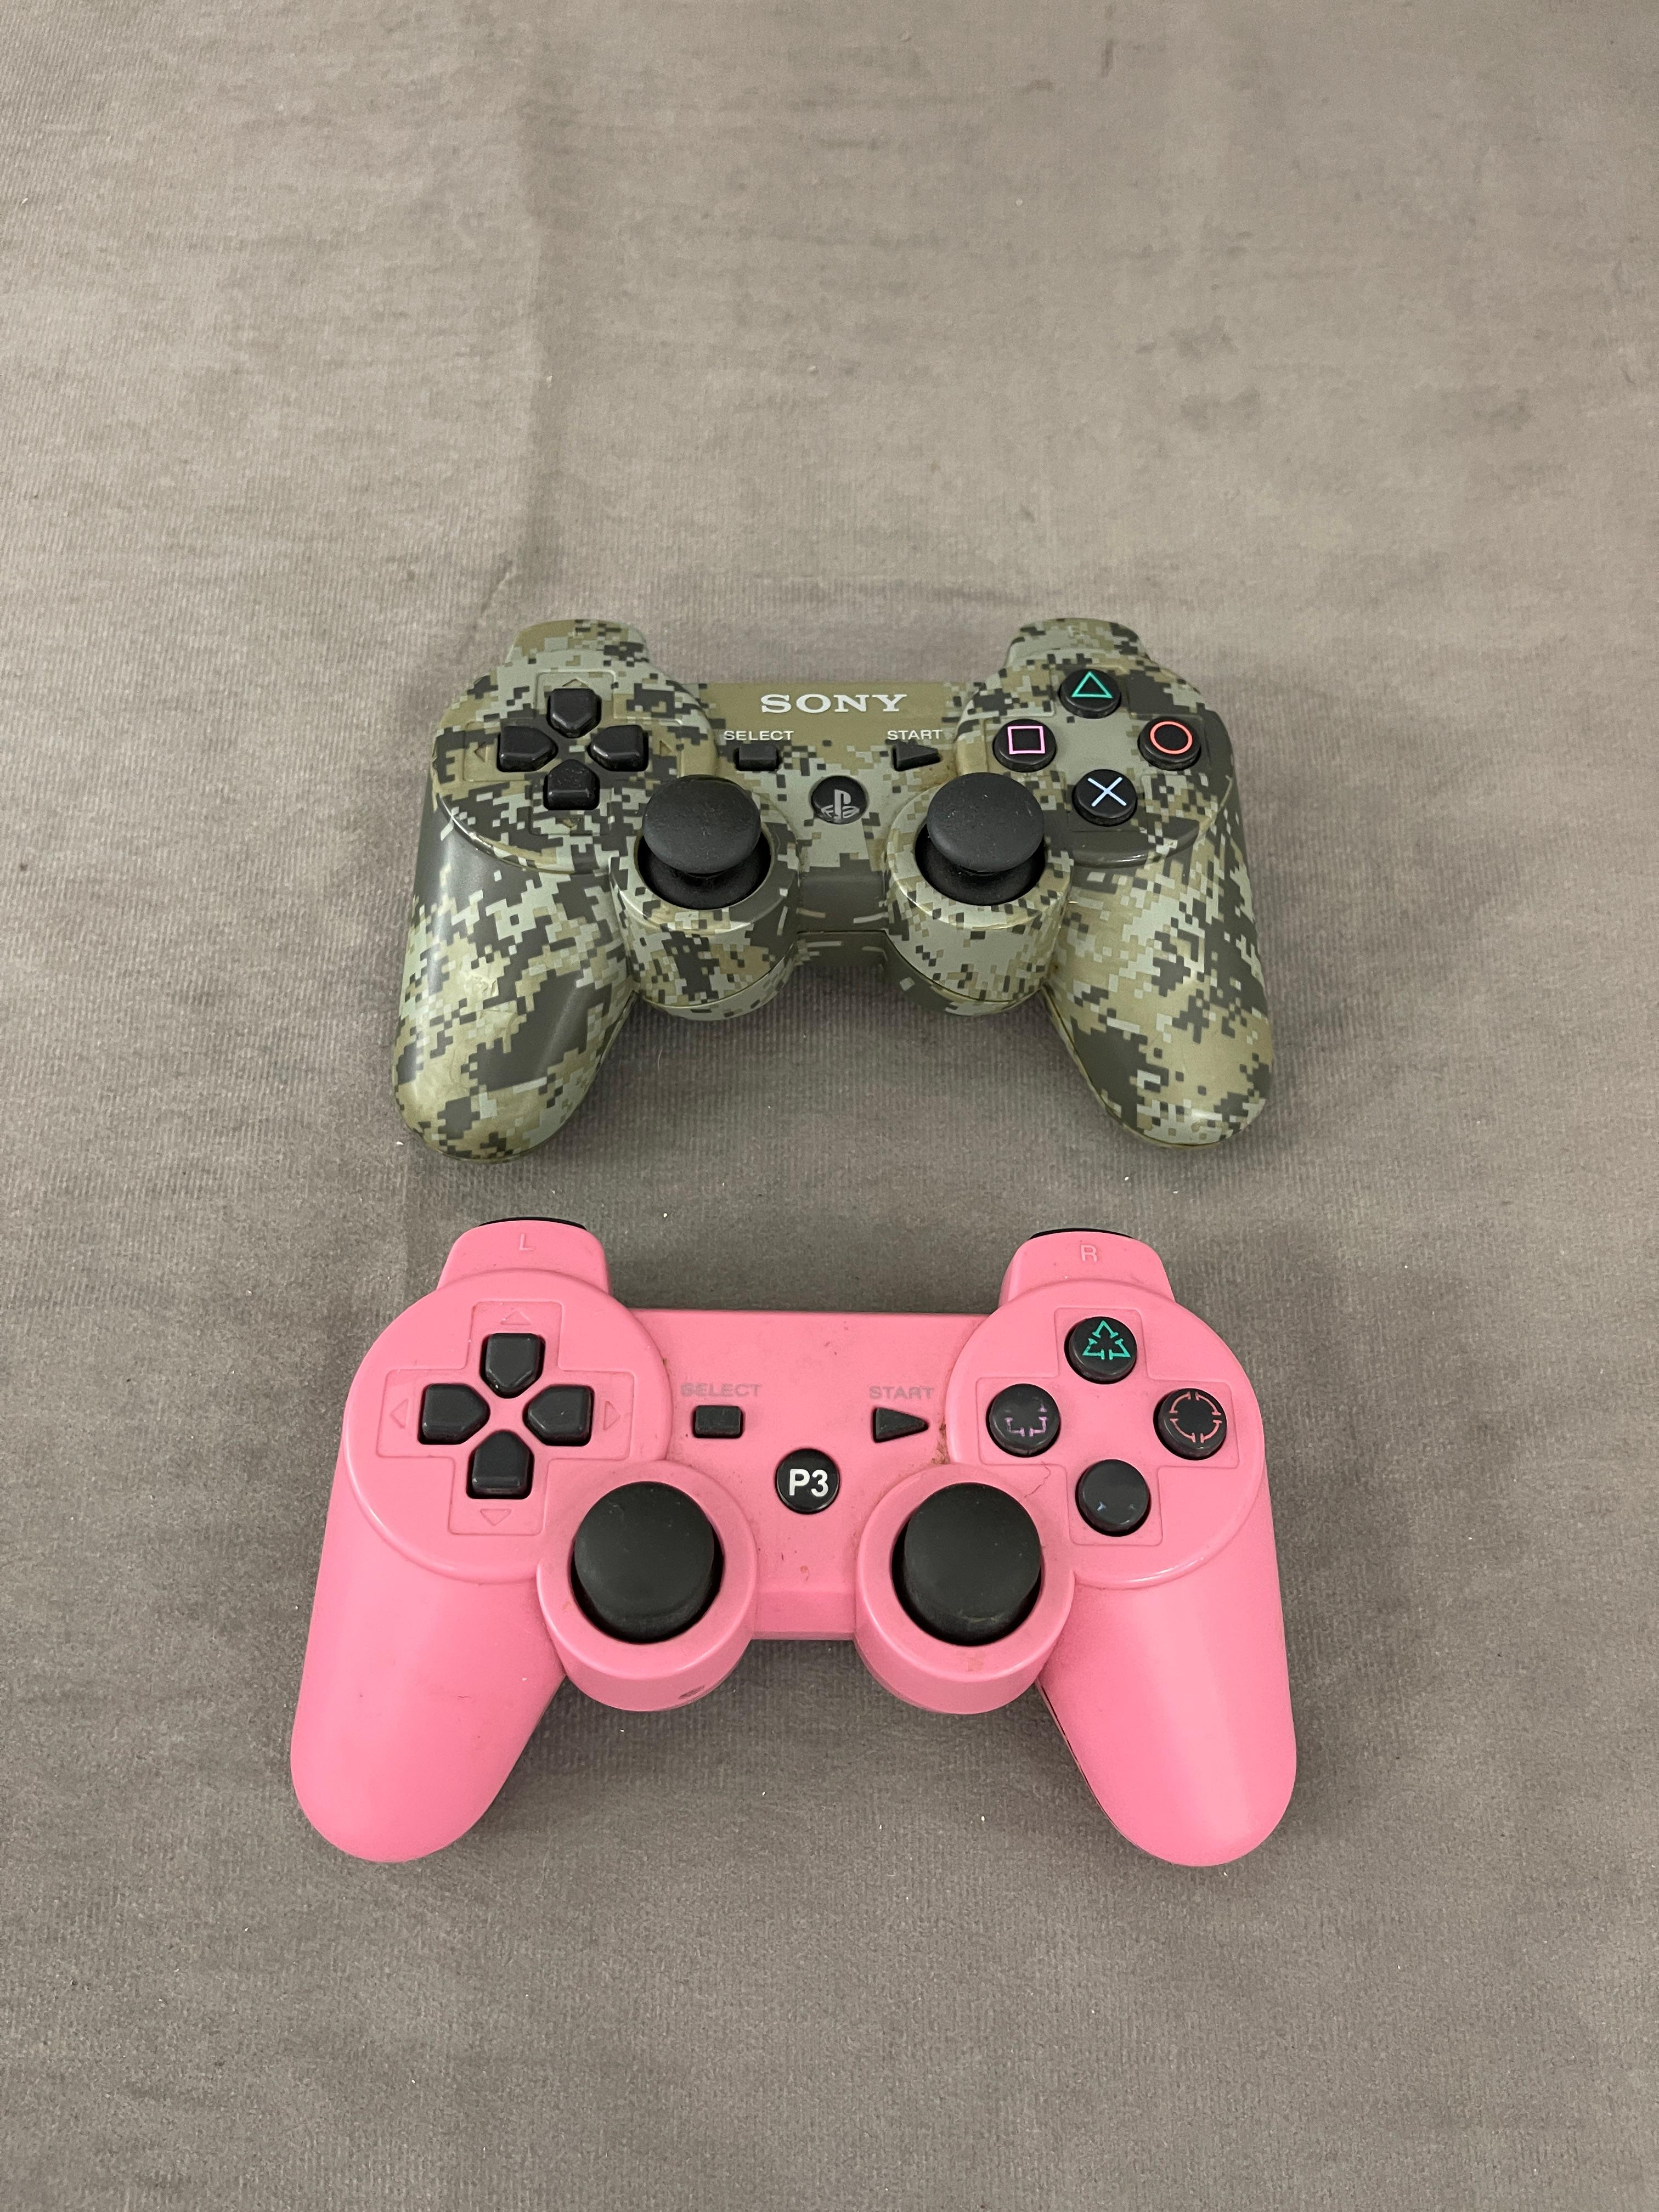 Sony PS3 Controllers